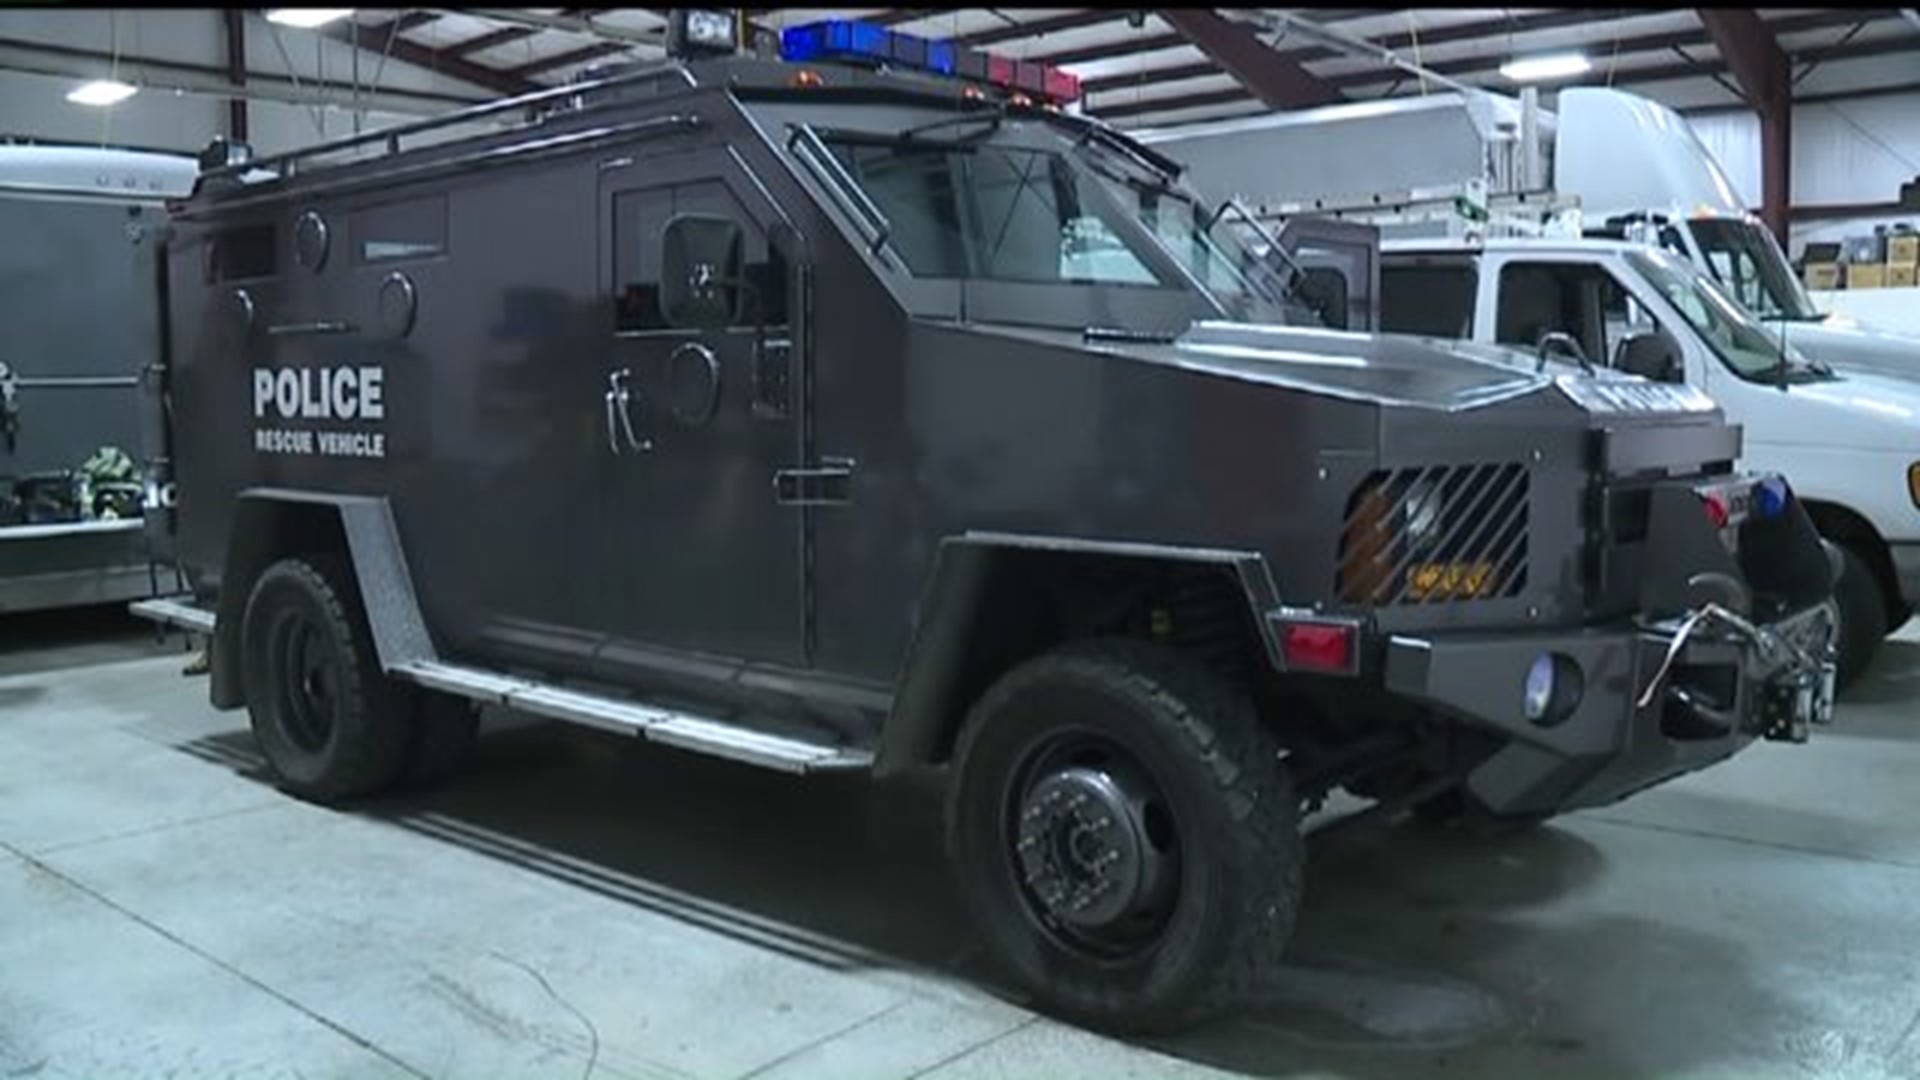 Armored police vehicles